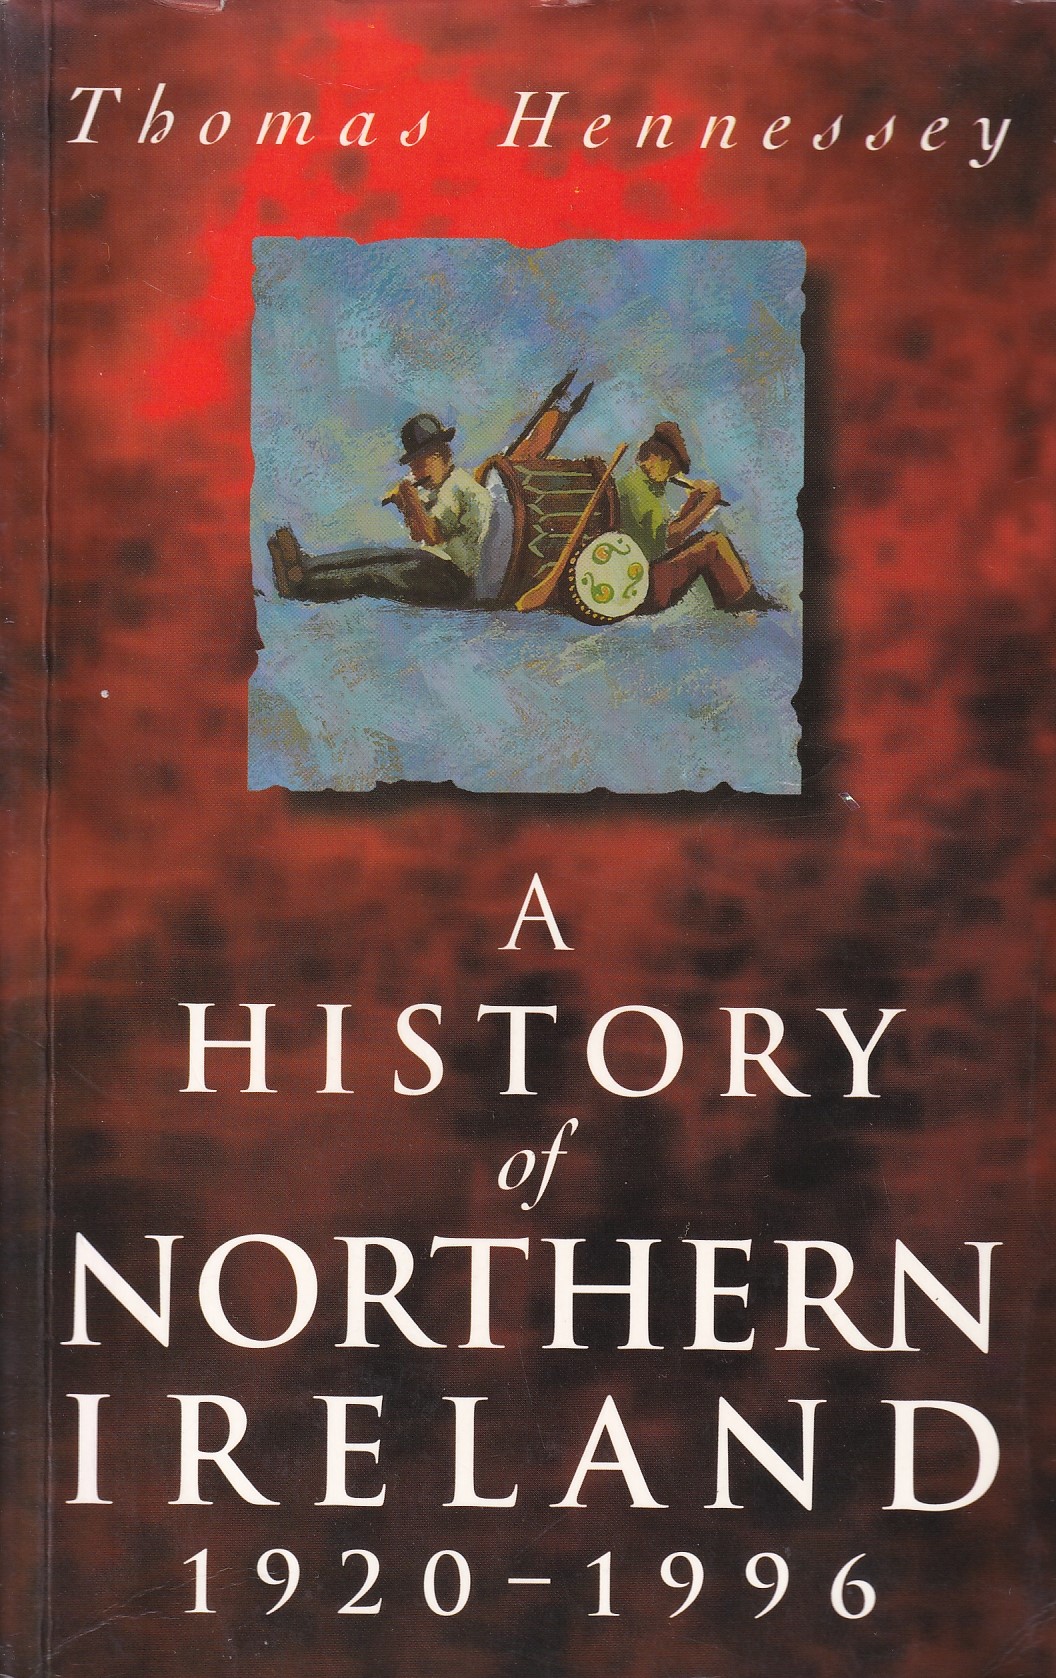 A History of Northern Ireland, 1920-1996 | Thomas Hennessey | Charlie Byrne's